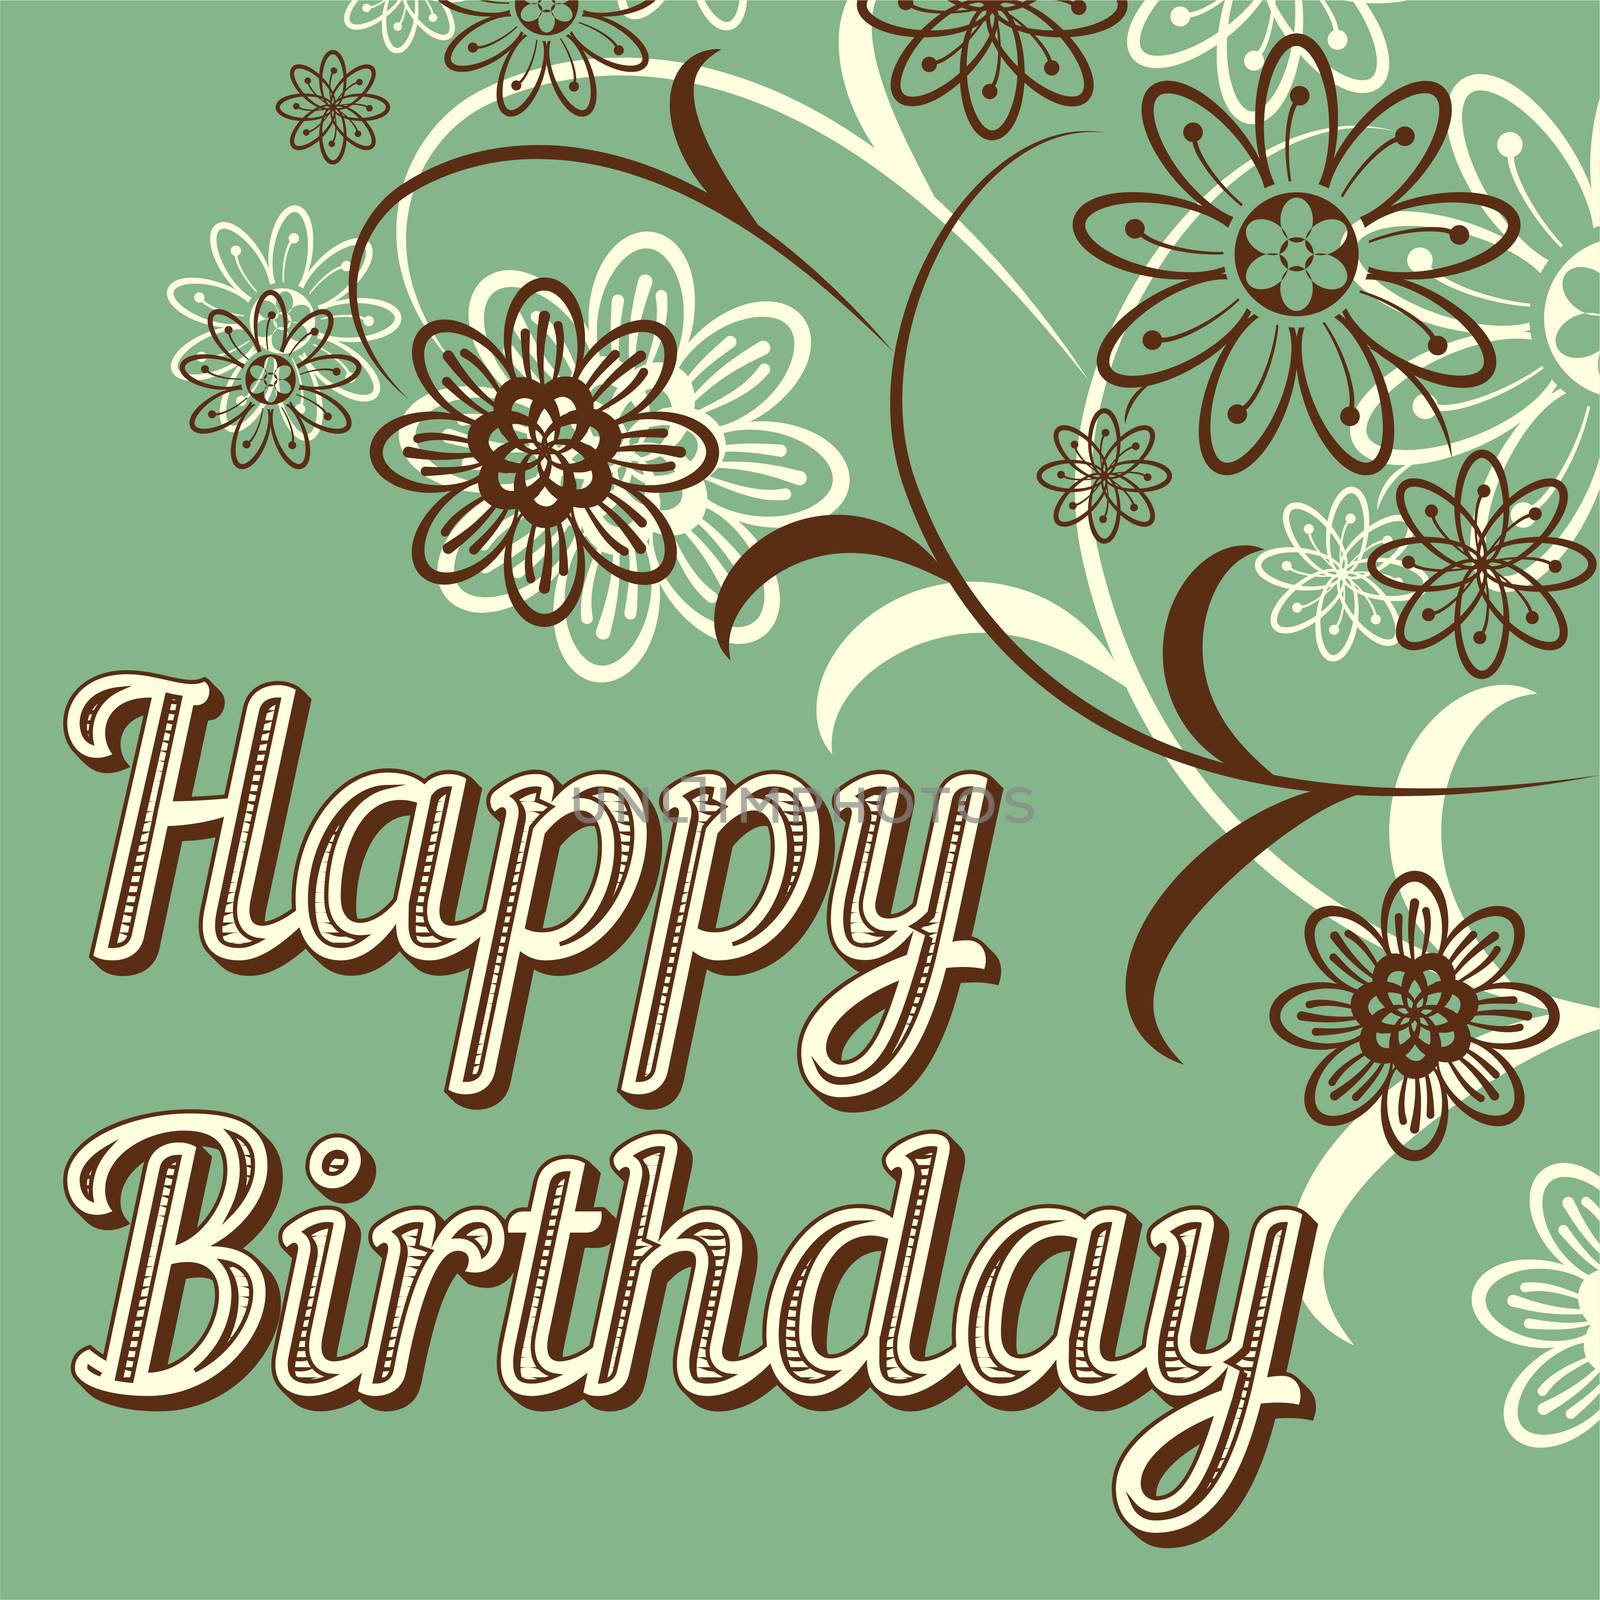 Vintage retro happy birthday card, with fonts, grunge frame and chevrons. Beautiful flowers. illustration